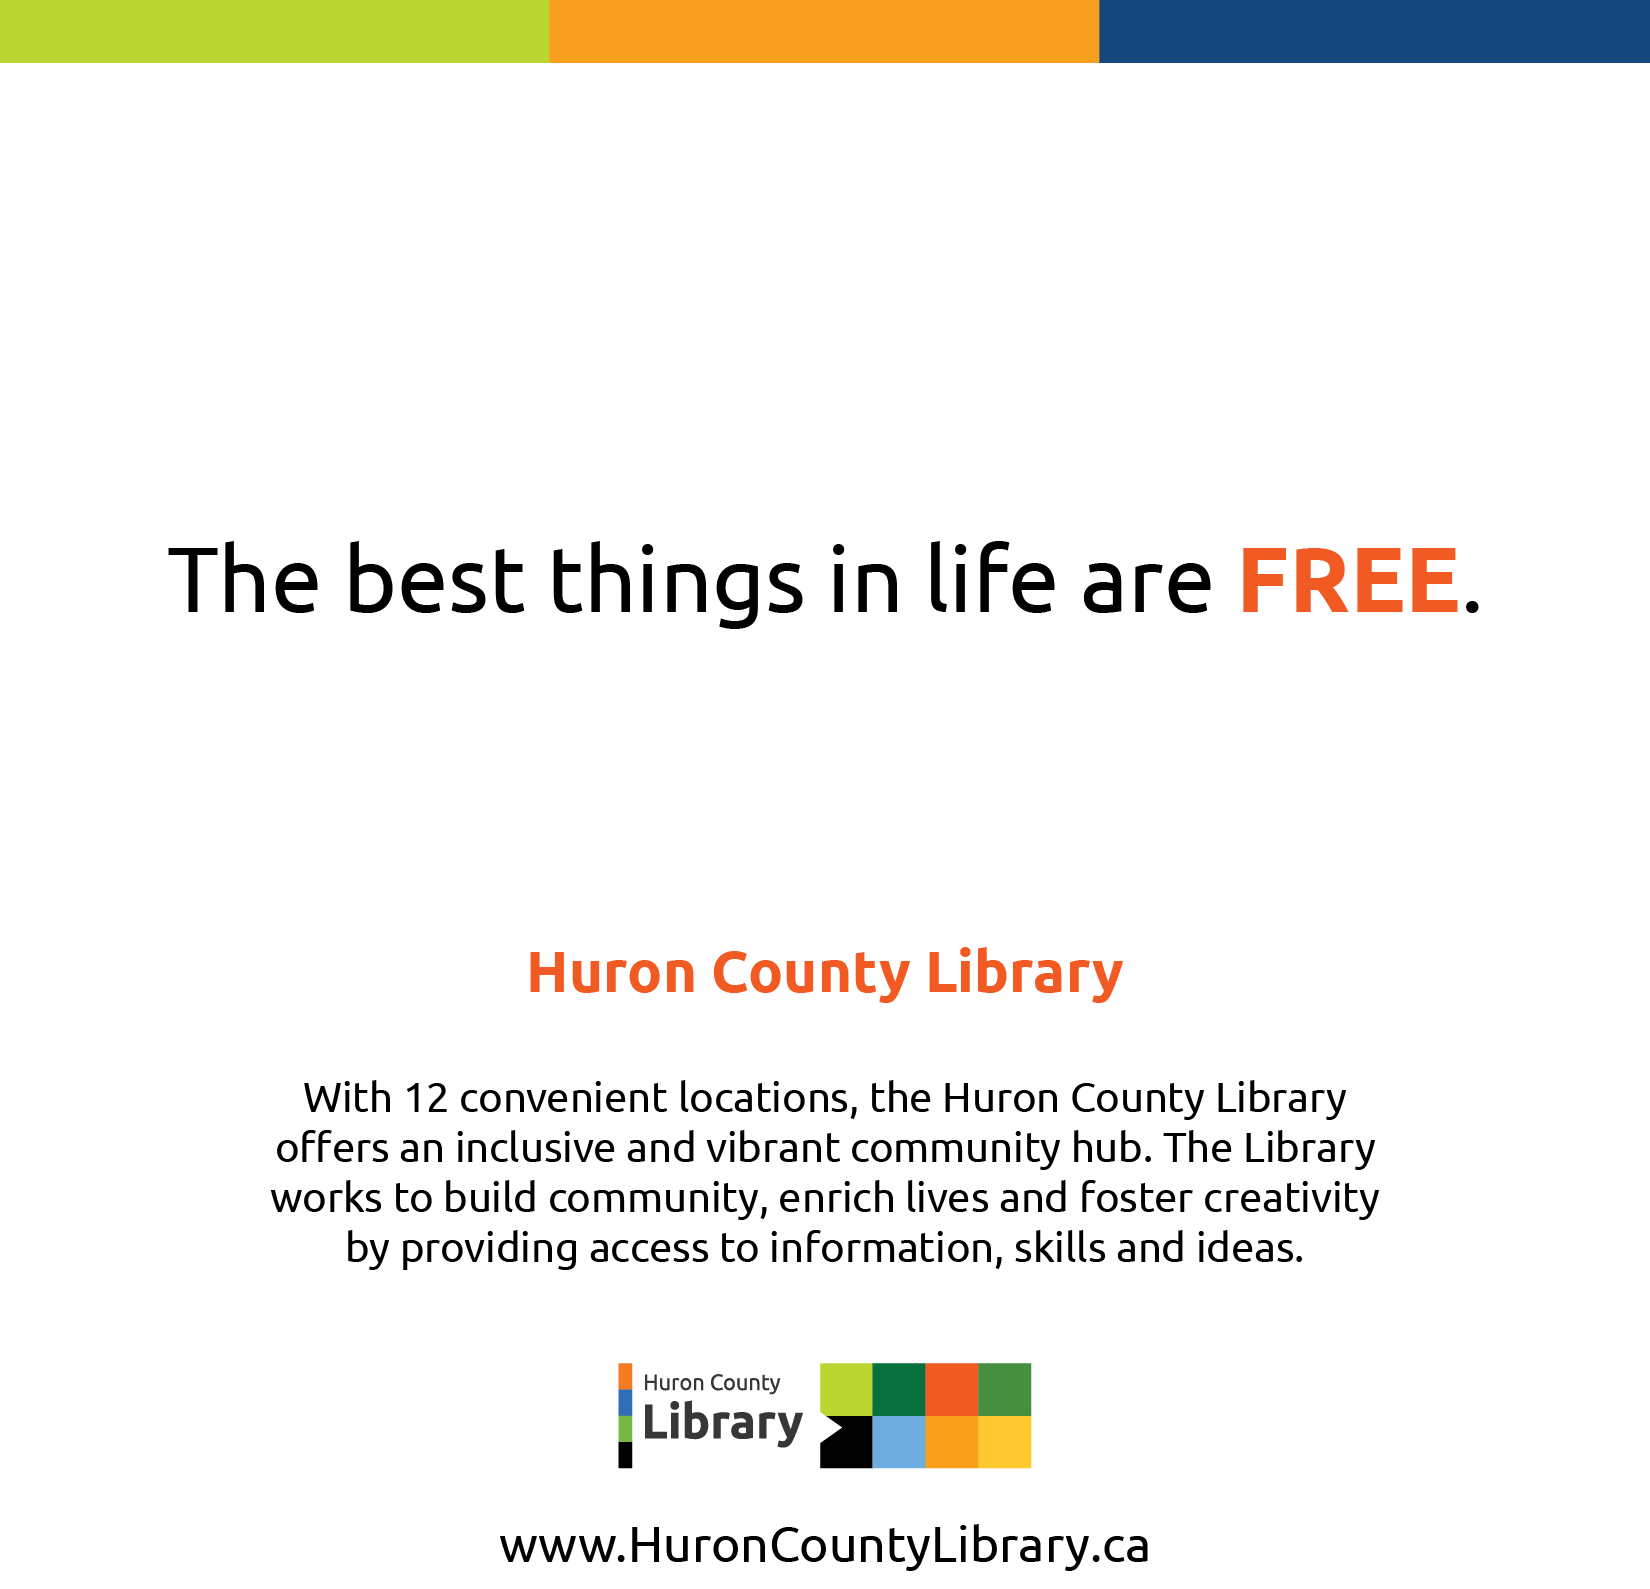 Image of the front cover of a Huron County Library brochure that features the library logo and text that reads The Best Things in Life are Free and info about the library's 12 branches.